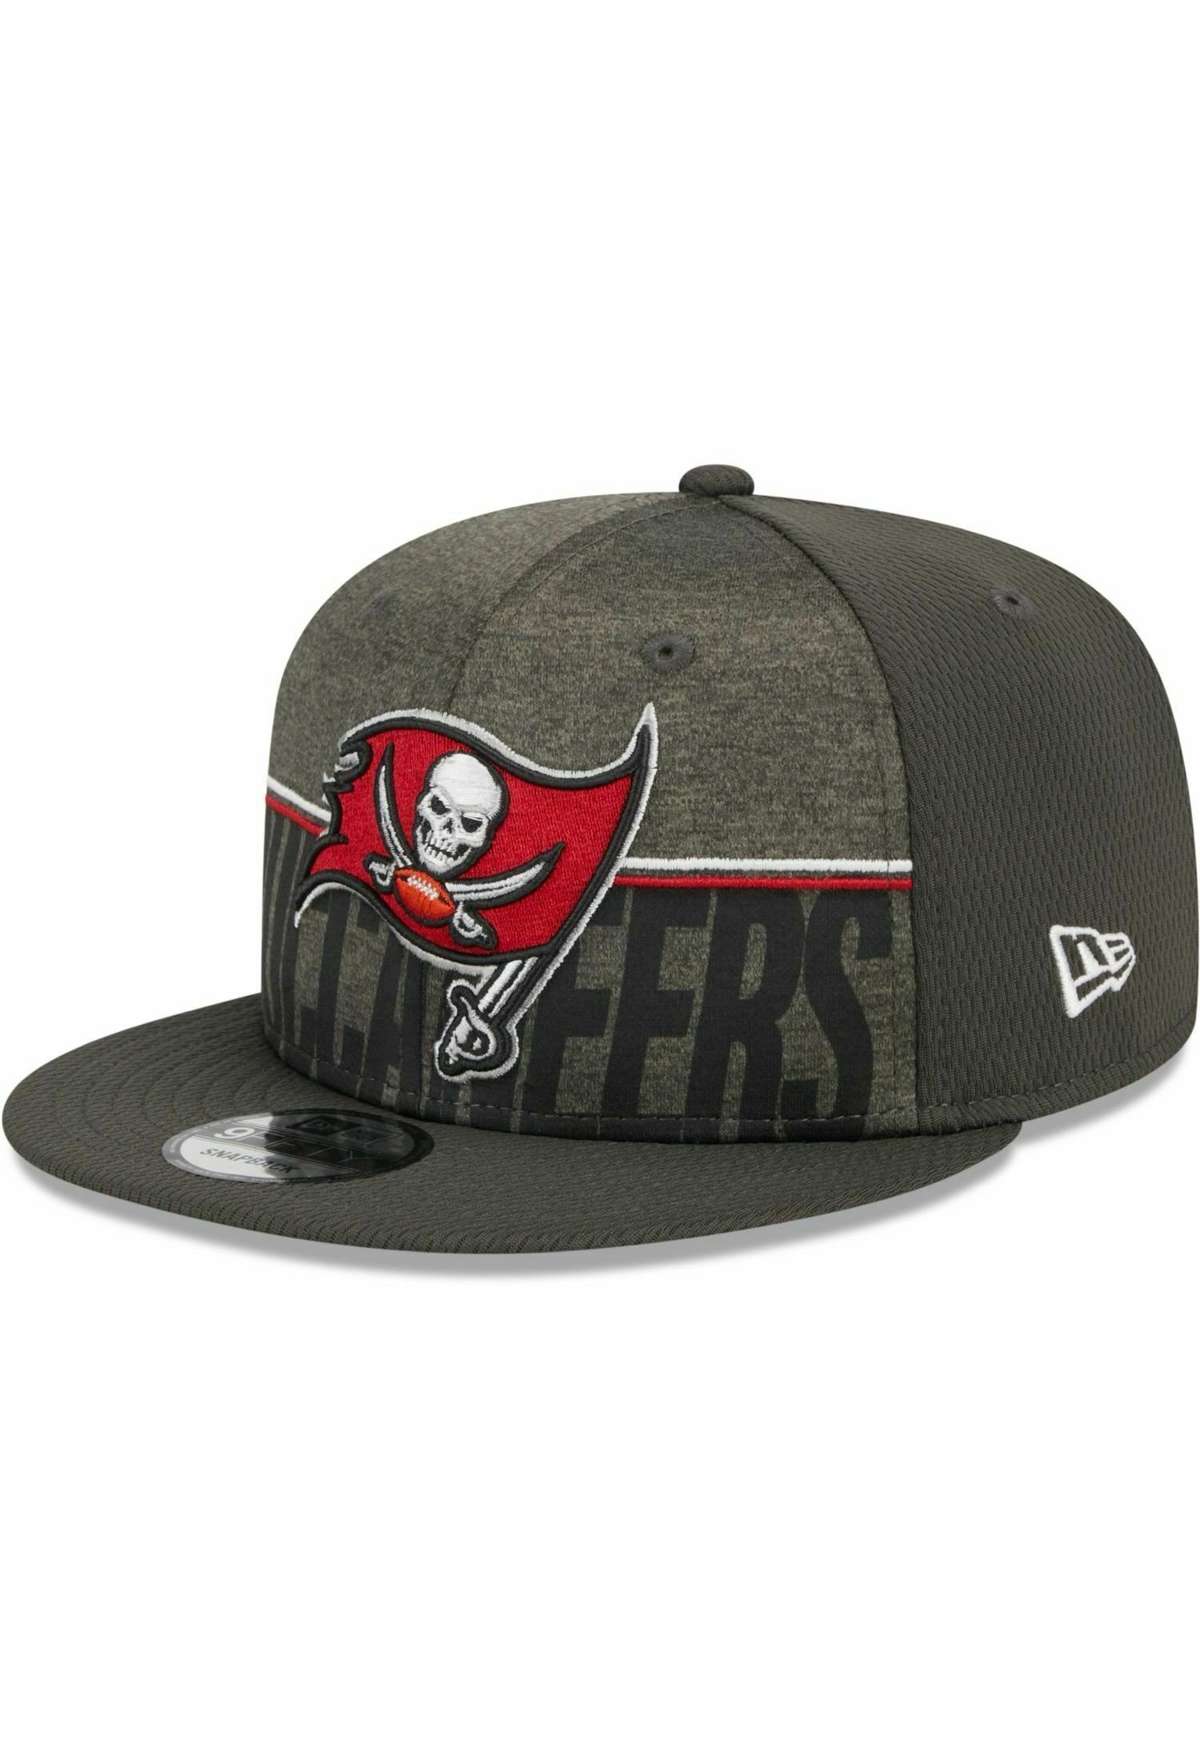 Кепка 9FIFTY TRAINING TAMPA BAY BUCCANEERS